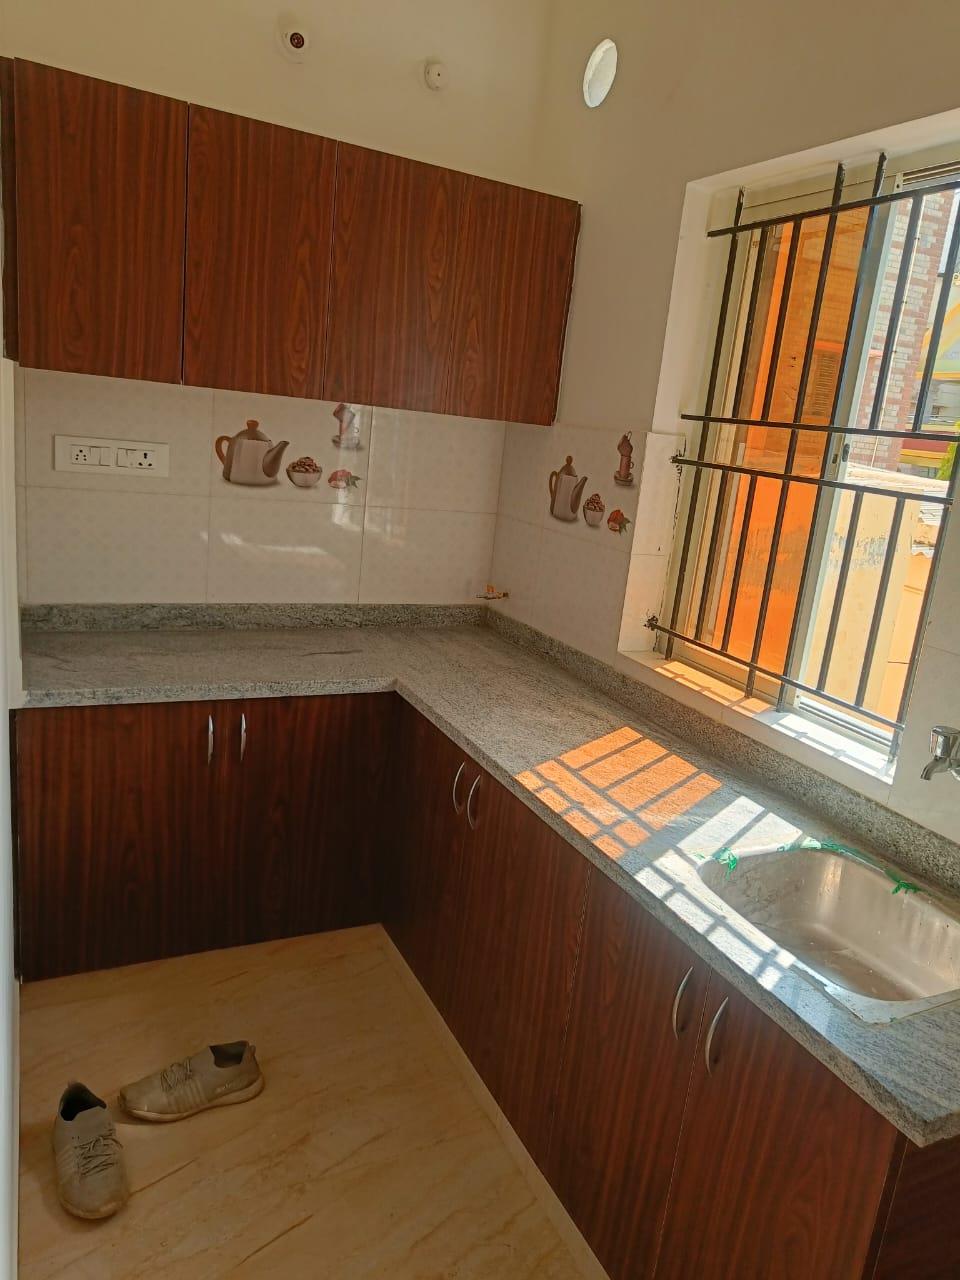 1 BHK Independent House for Lease Only at 16 Lakhs - JAML2 - 191 in Muneshwara Block